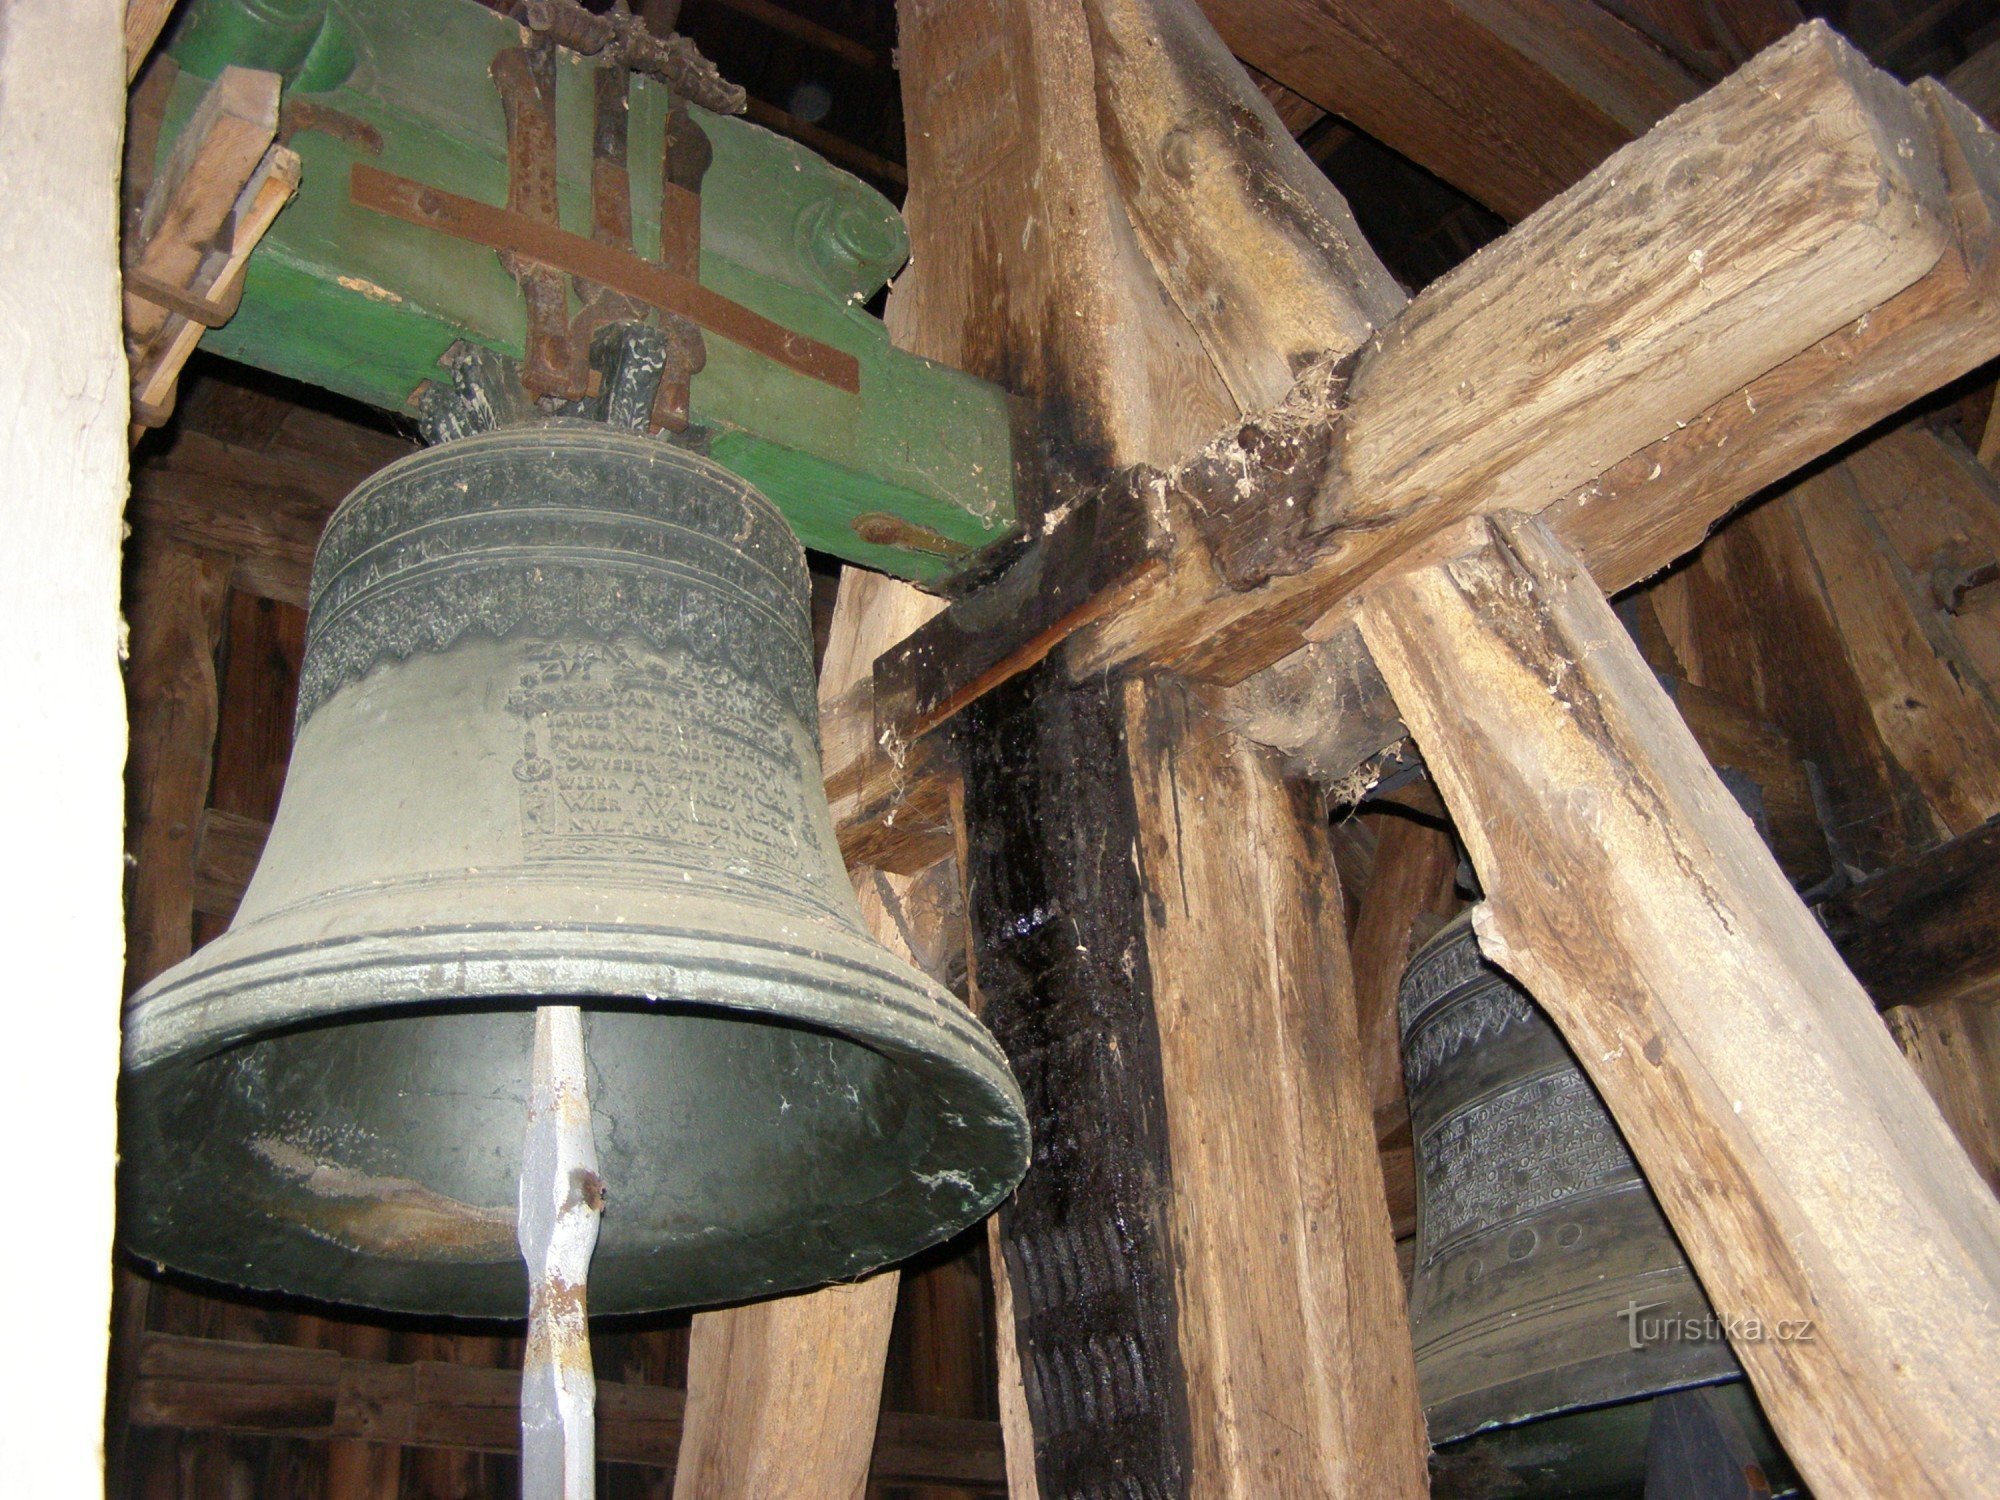 the bell in the belfry